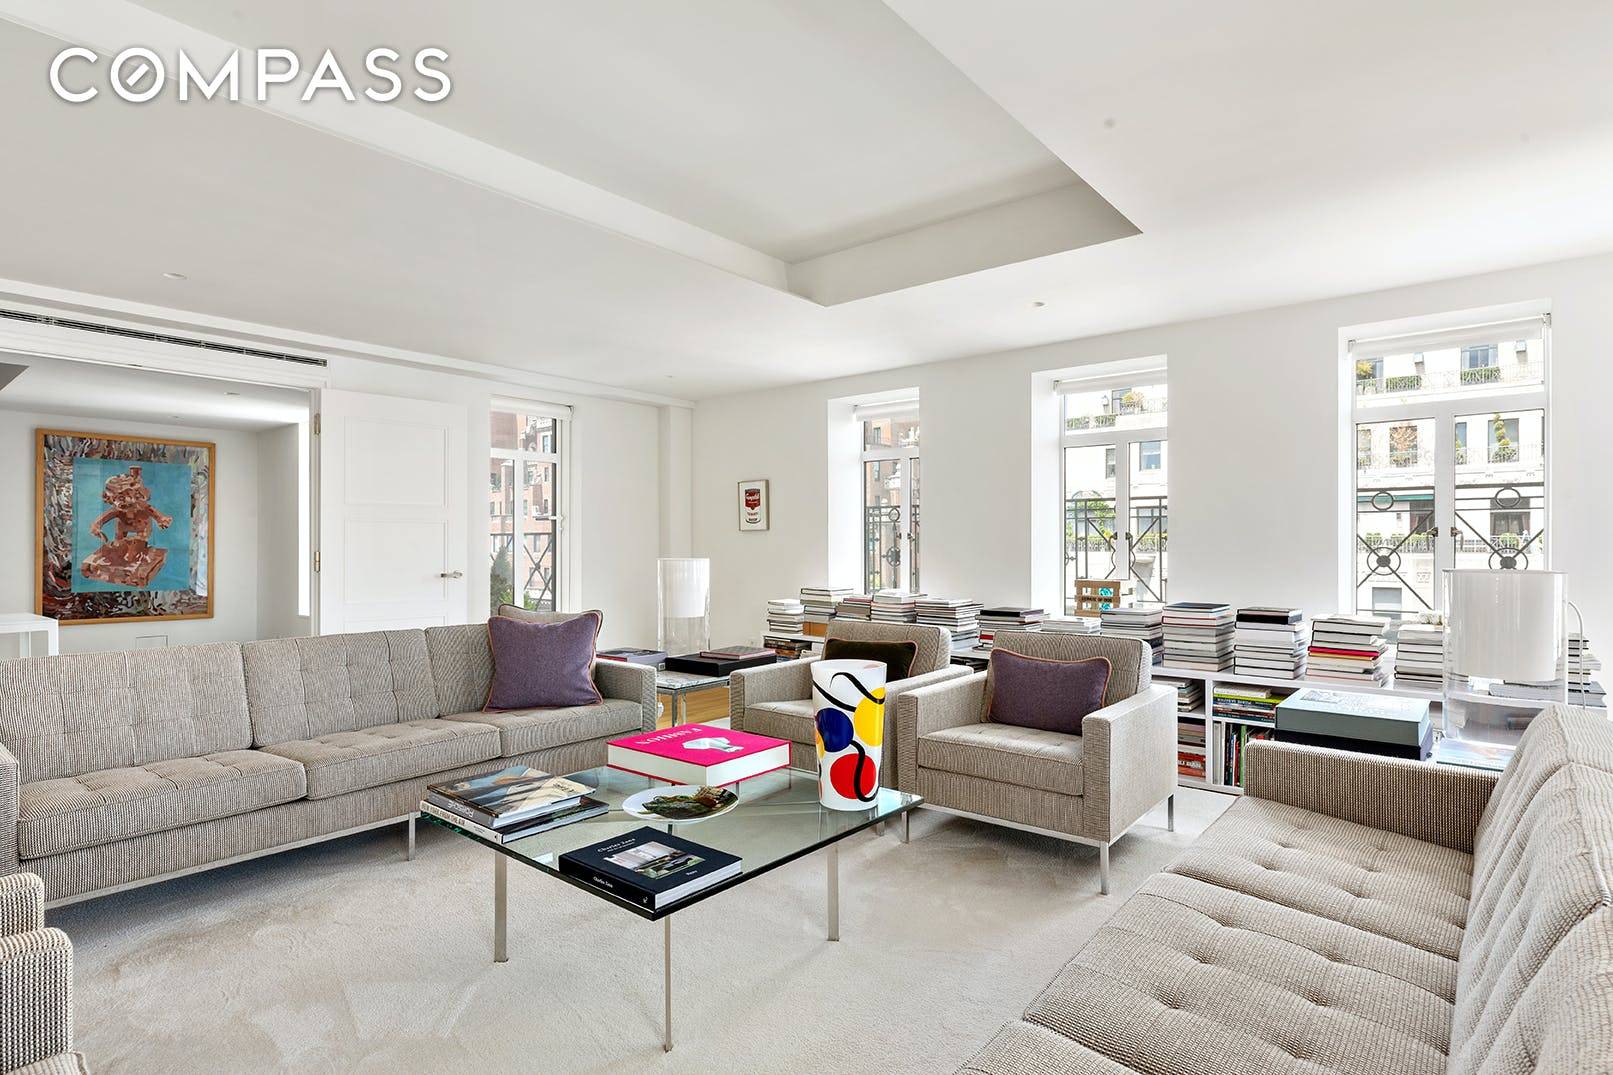 Located on one of the most prestigious corners of the Upper East Side at 71st Street and Park Avenue, just two blocks from Central Park and surrounded by some of ...